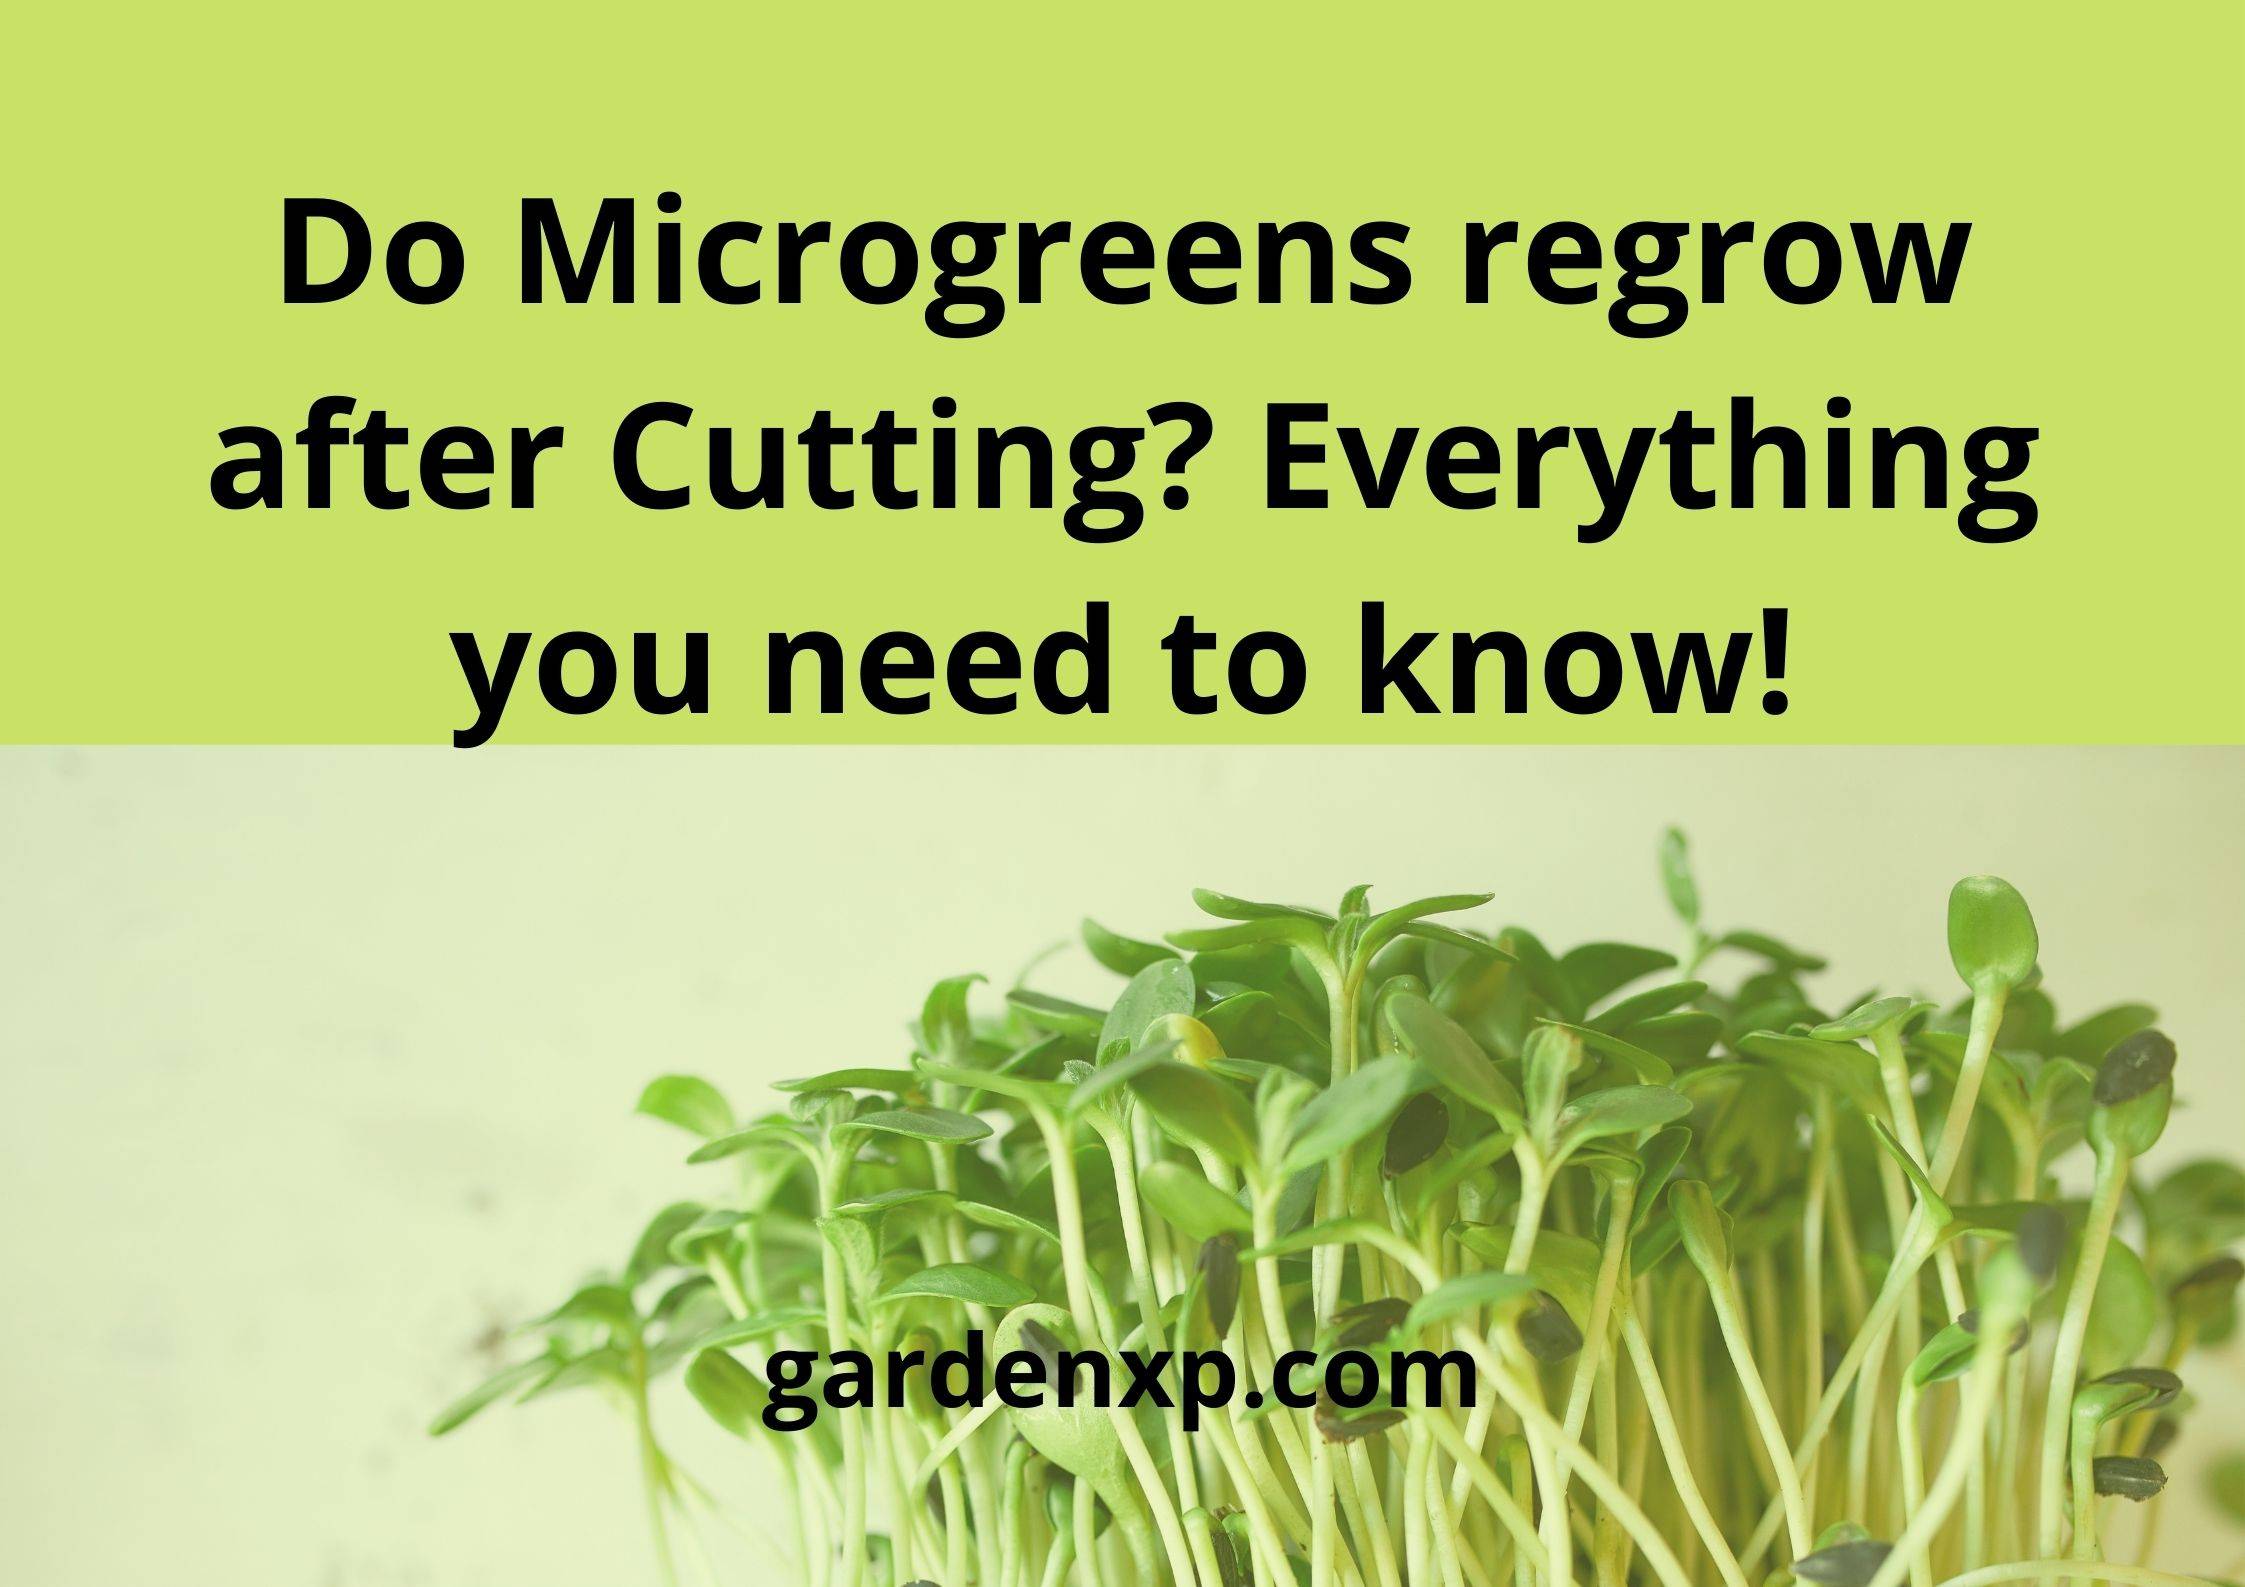 Do Microgreens regrow after Cutting? Everything you need to know!